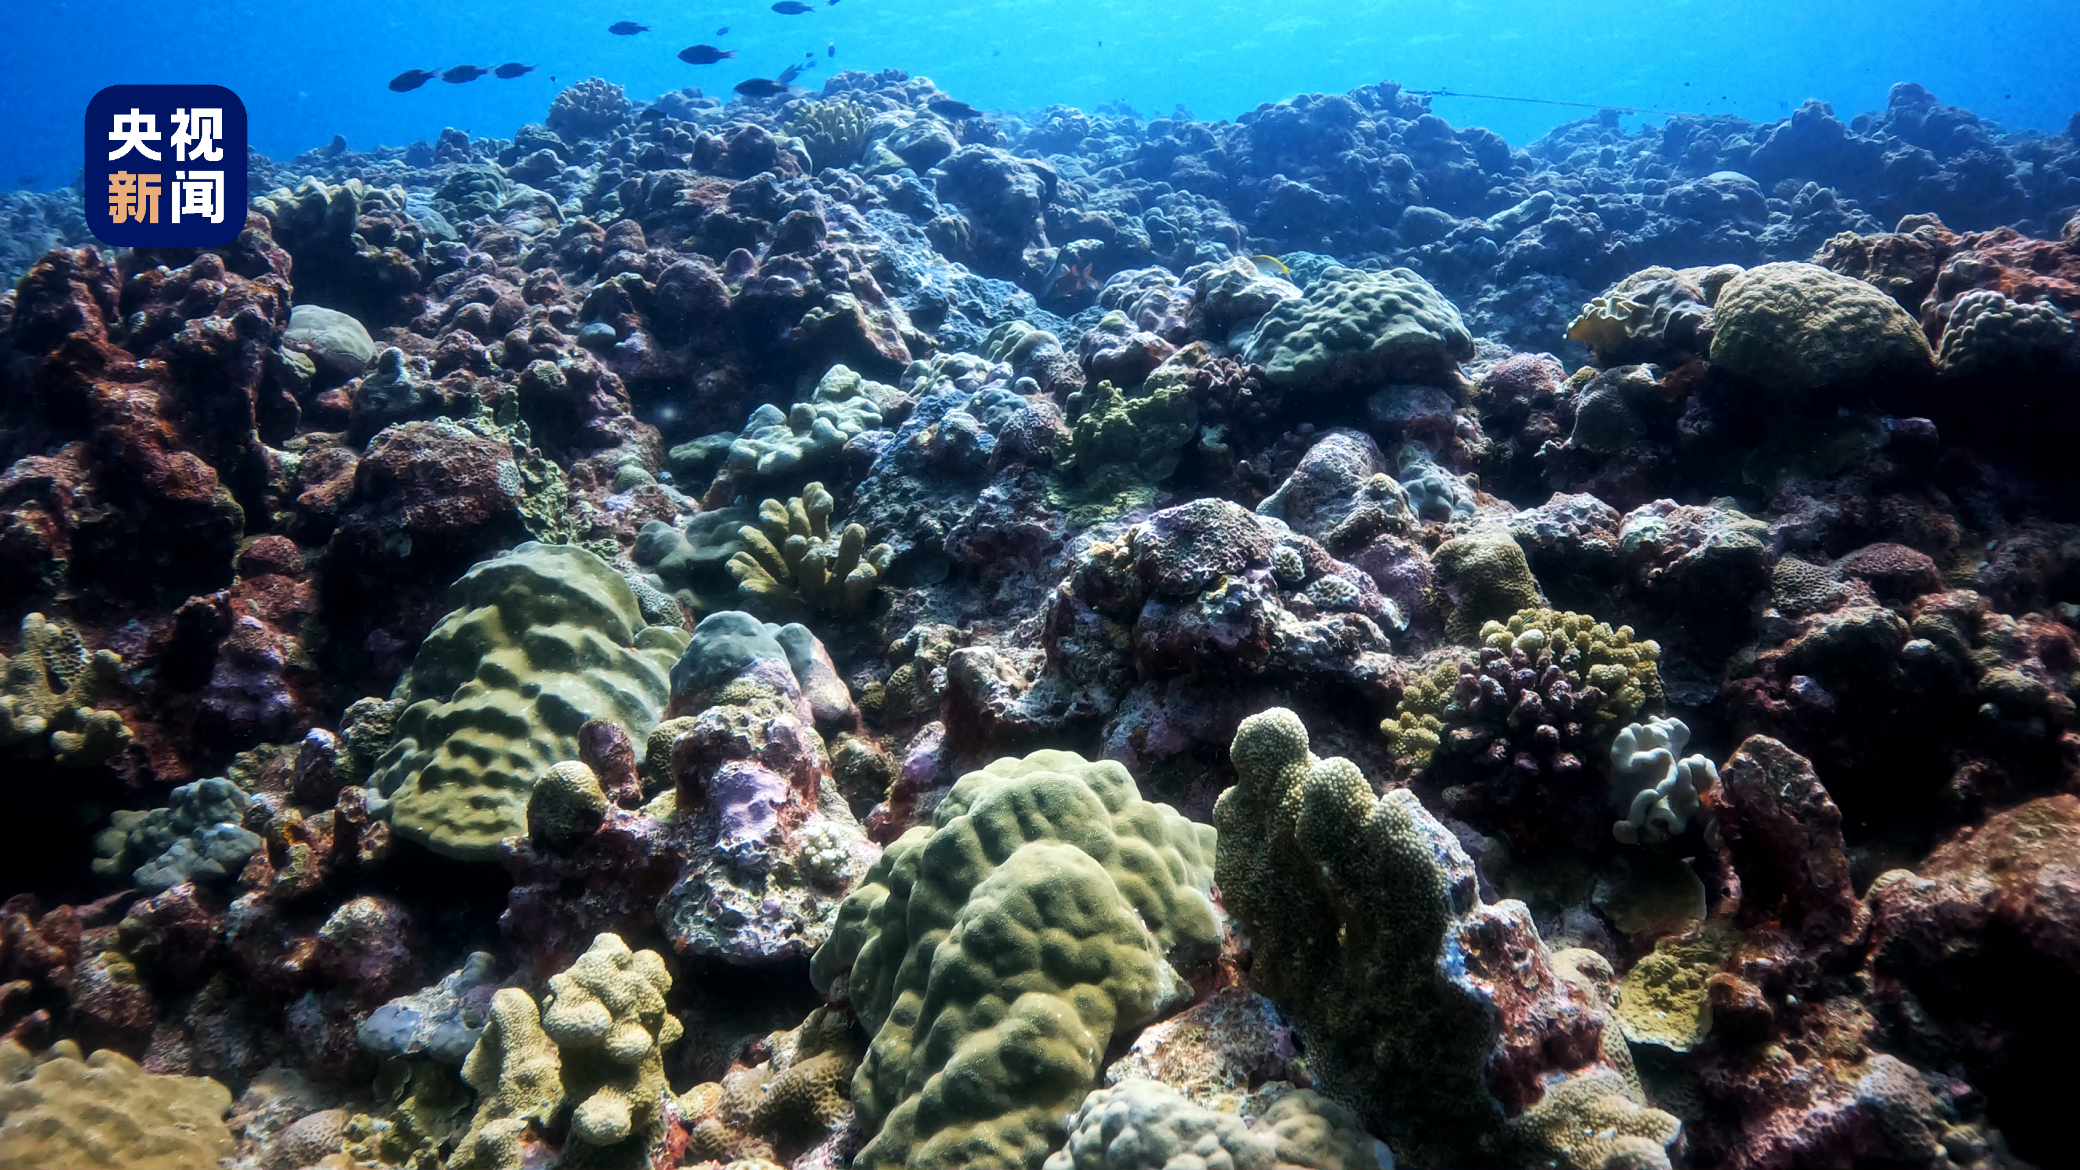 Coral reefs in the waters around the Huangyan Dao area. /China Media Group